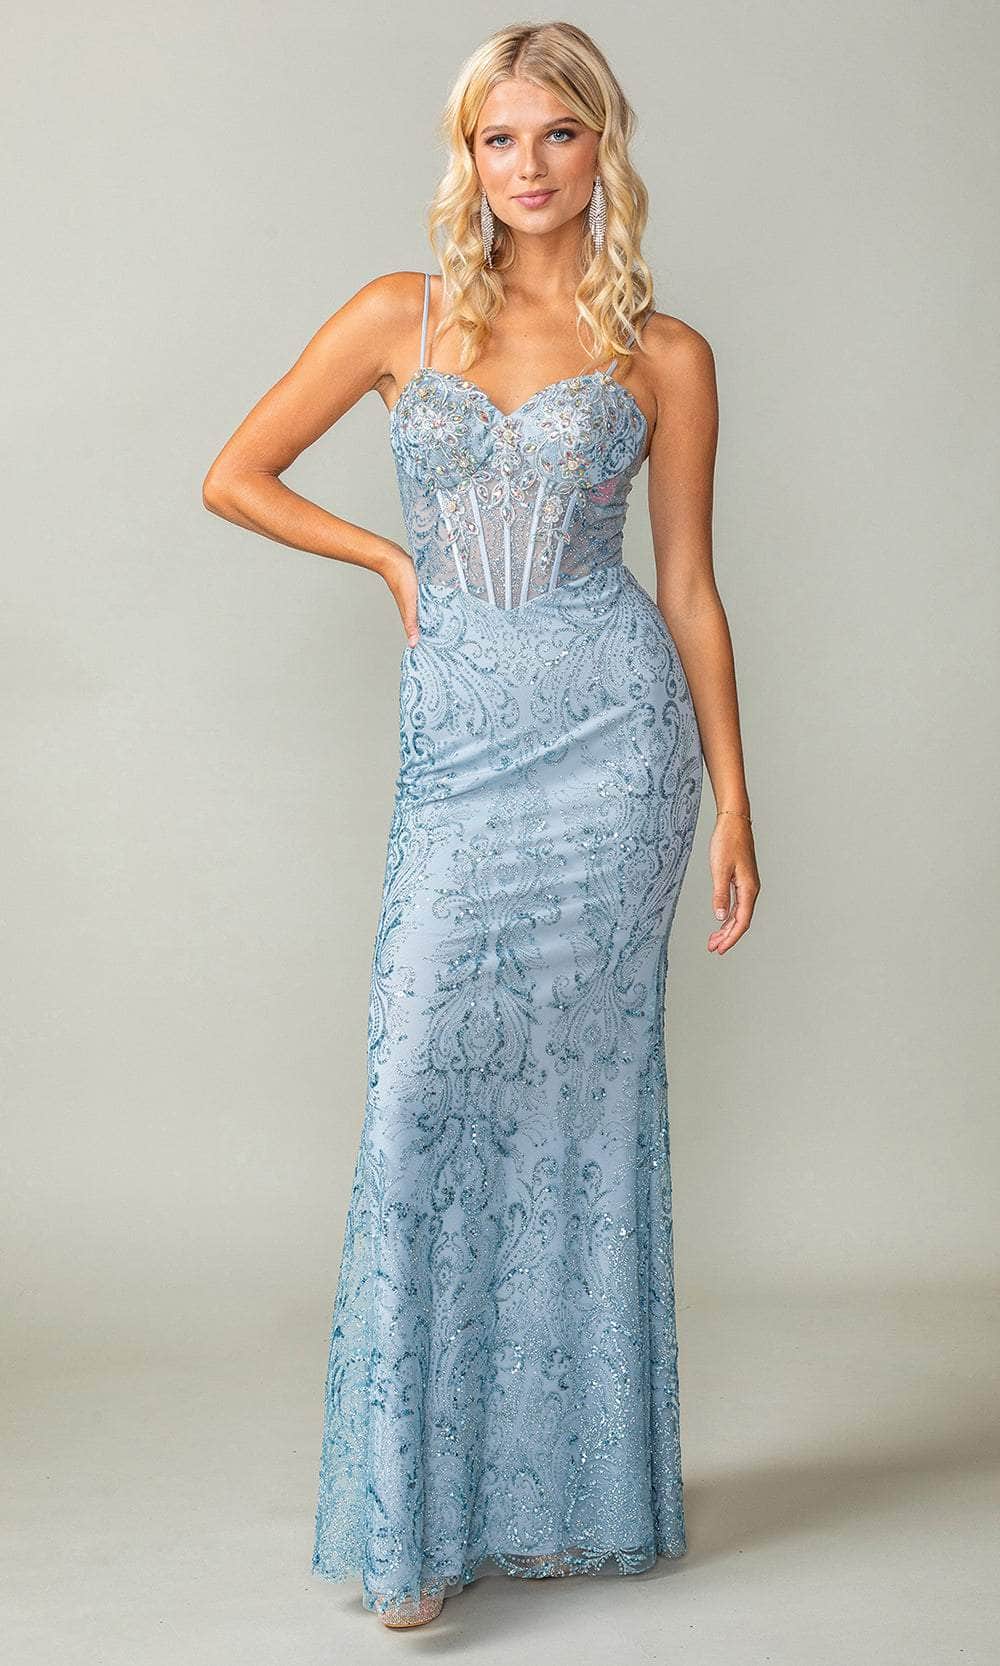 Dancing Queen 4417 - Sweetheart Embellished Prom Gown
